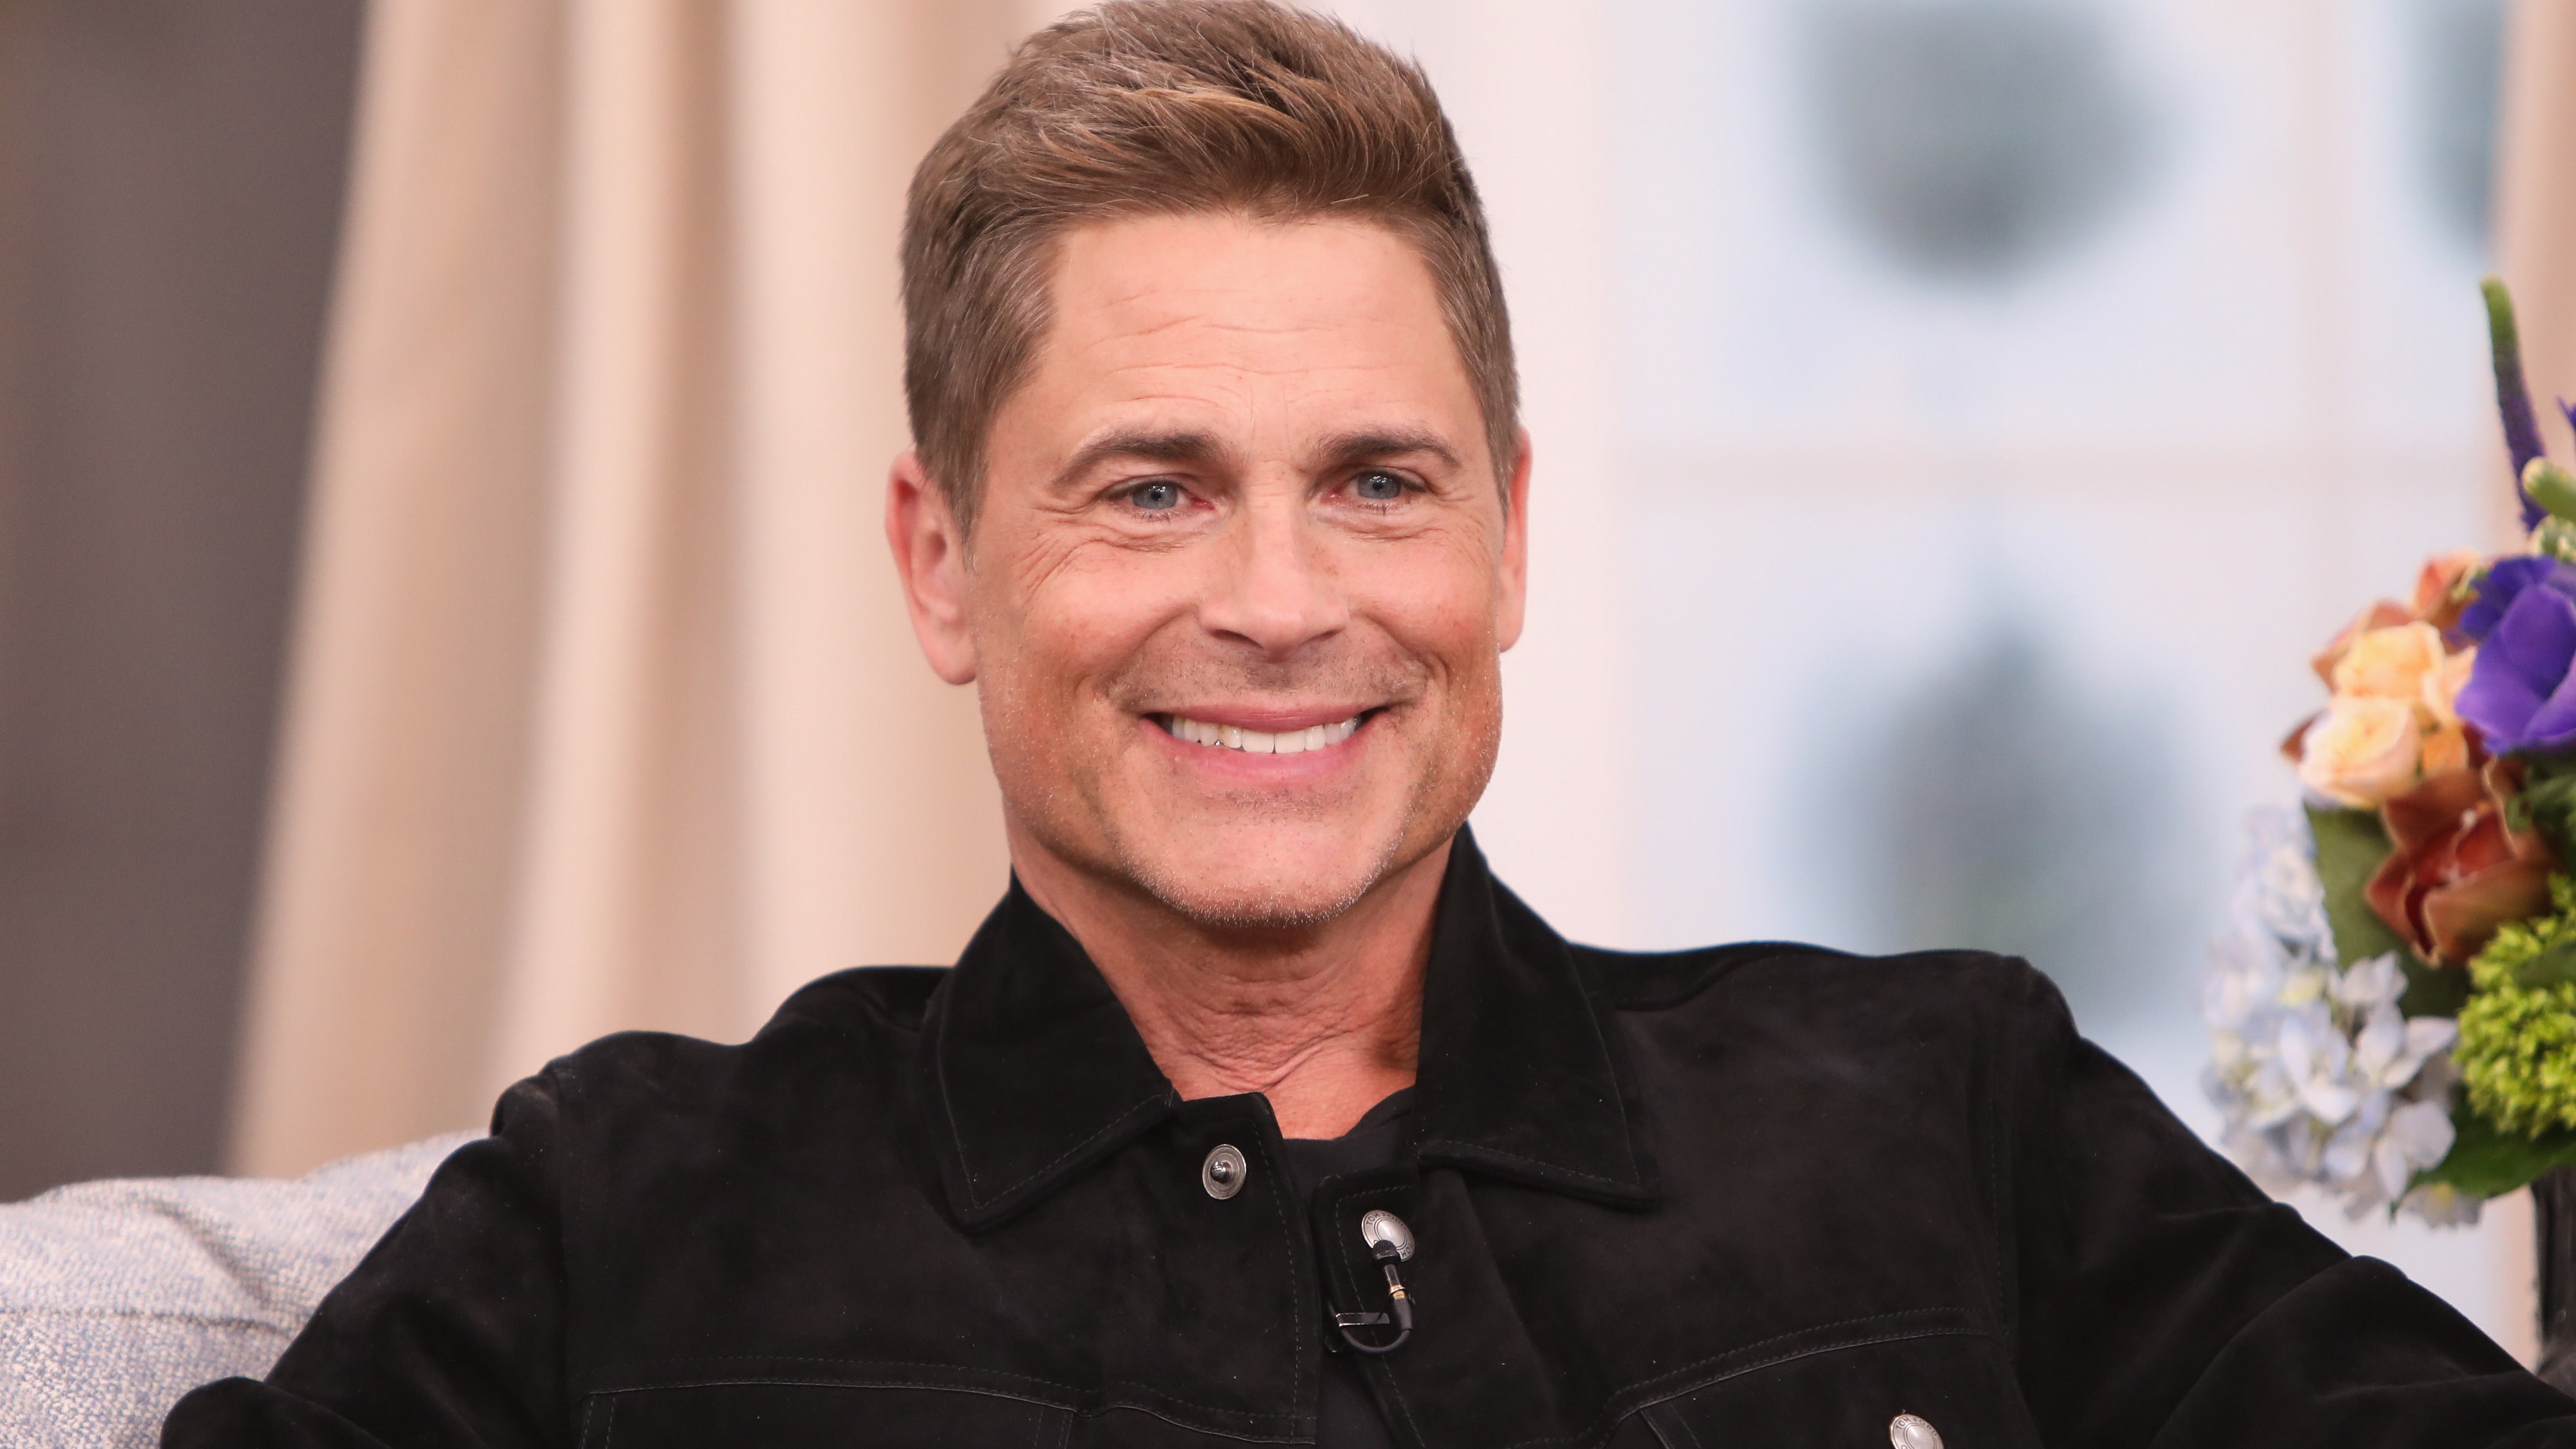 Rob Lowe shares throwback photo in honor of 57th birthday: ‘I am a grateful man’